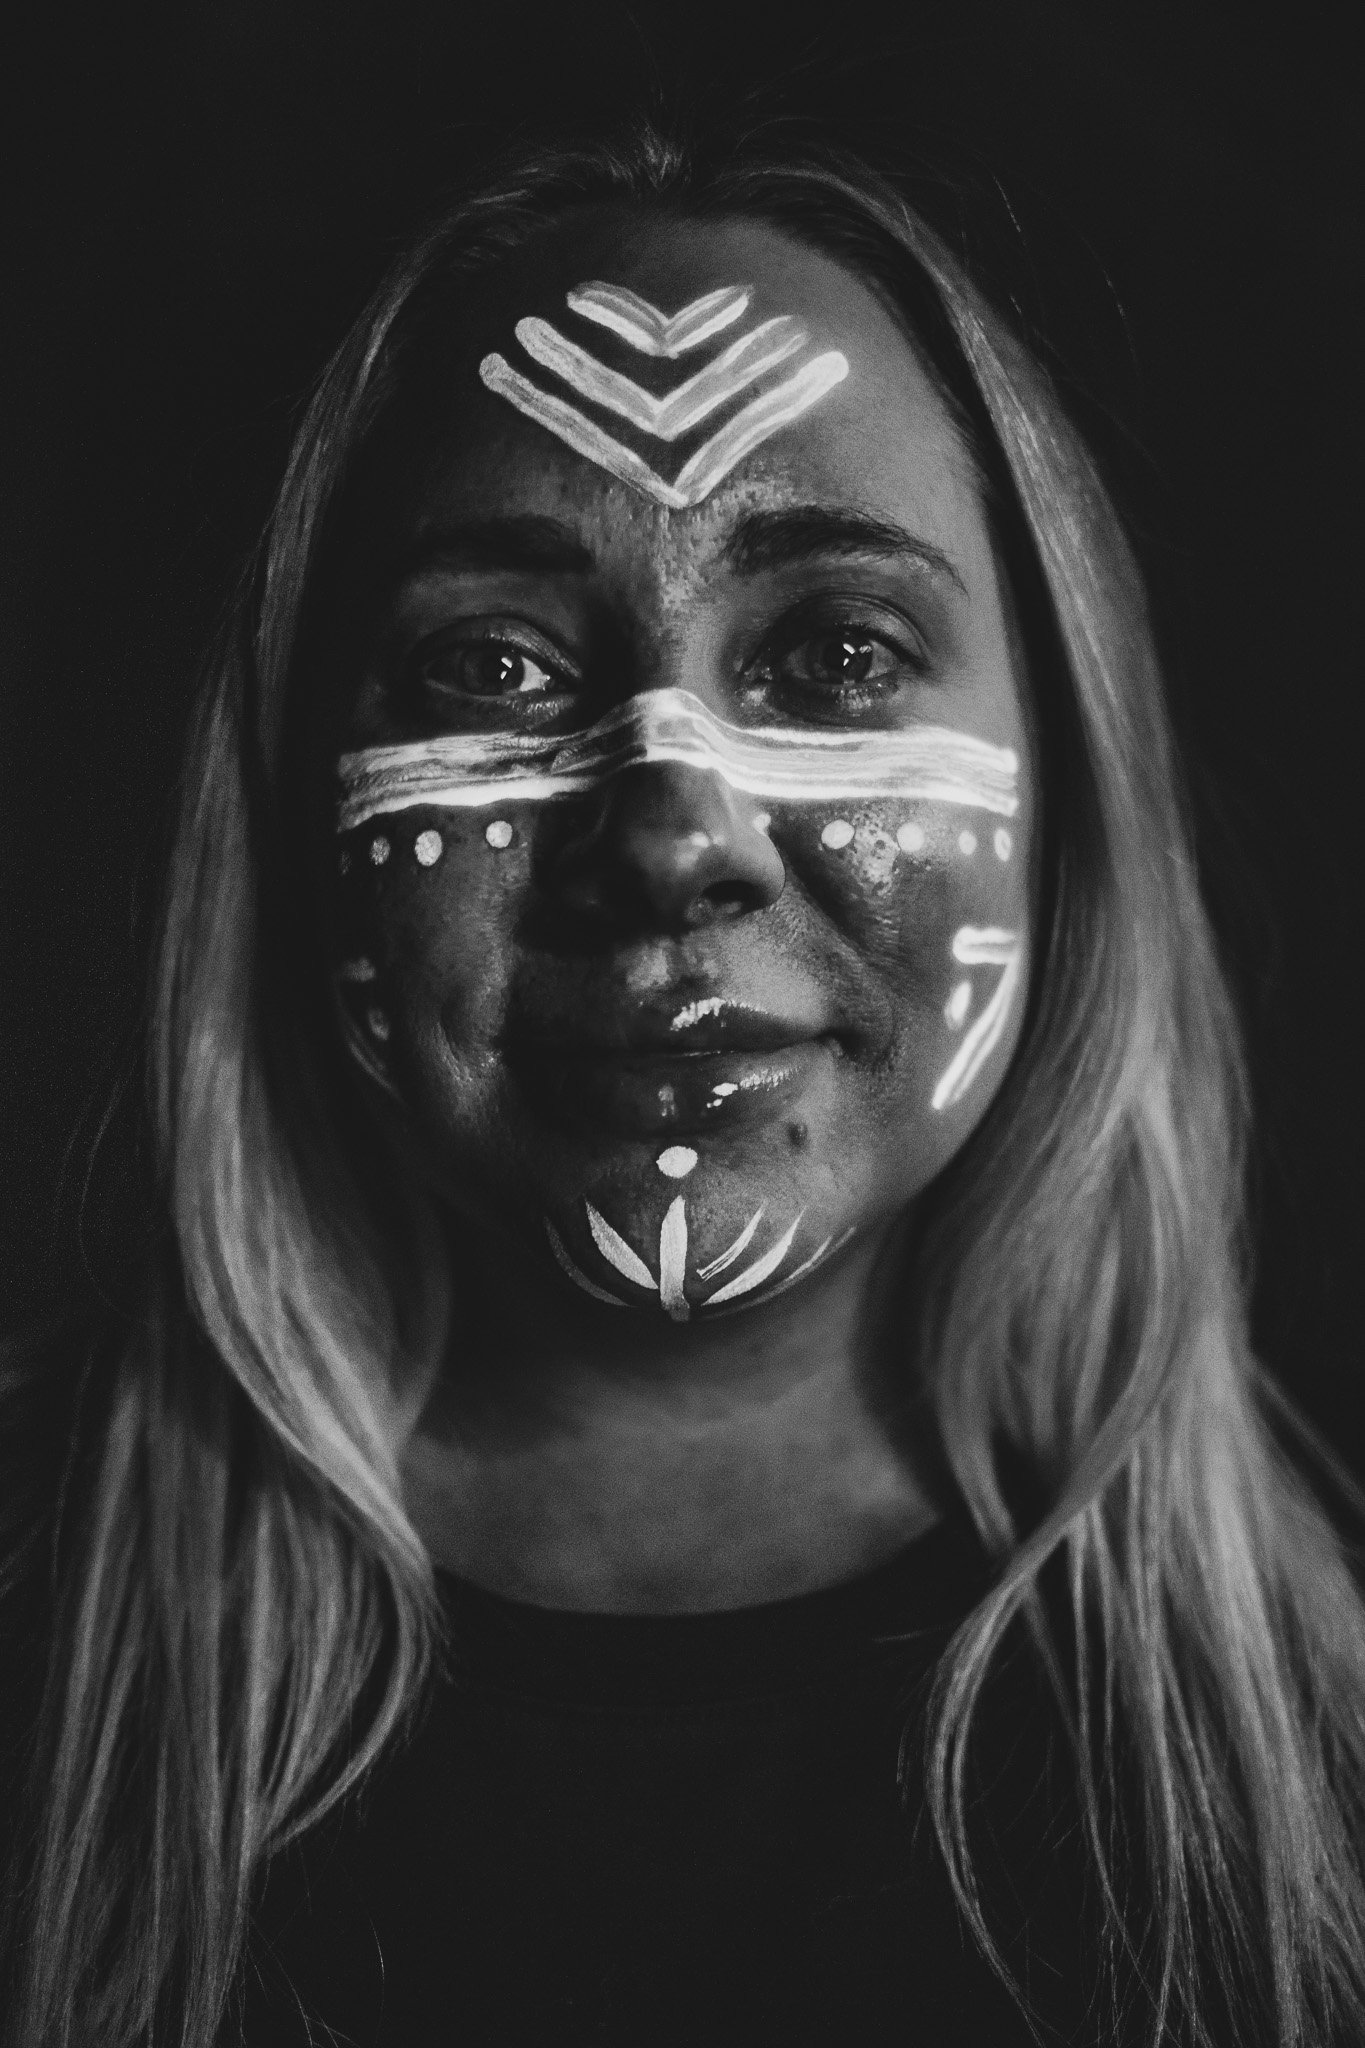 Woman poses with trendy, geometric neon body paint on their face for alternative neon body painting creative photoshoot by phoenix body artist, La Luna Henna and photographer Jennifer Lind Schutsky.